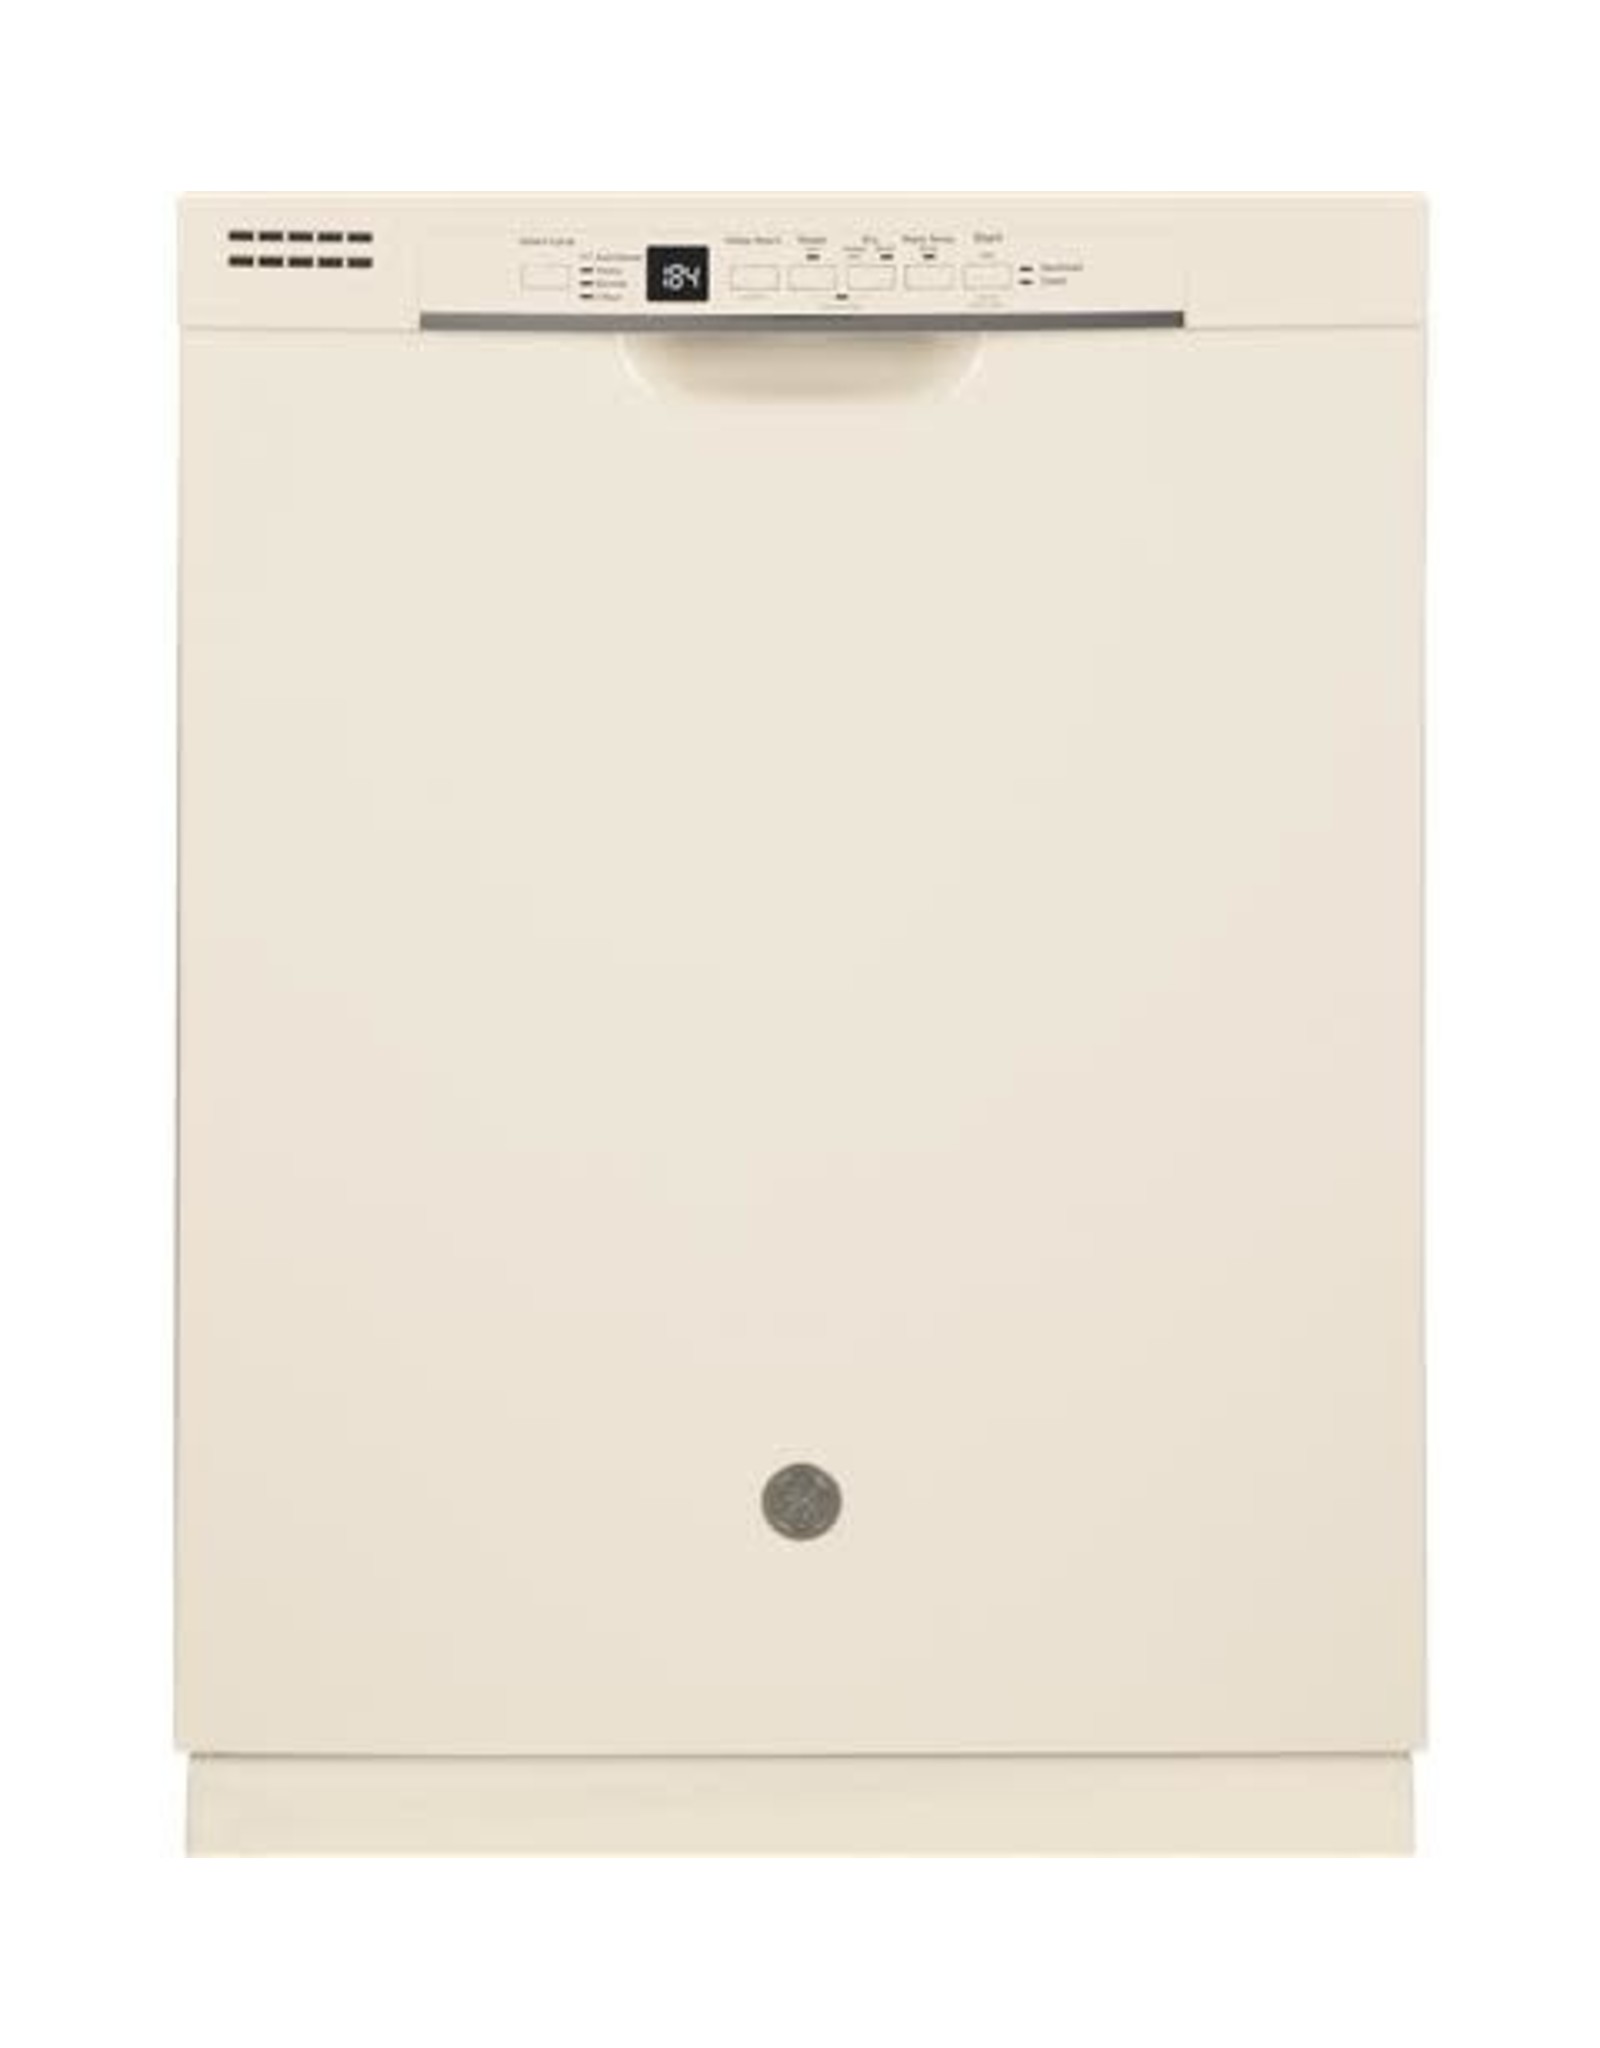 GE GDF530PGMCC 24 in. Bisque Front Control Tall Tub Dishwasher with Steam Cleaning, Dry Boost and 55 dBA